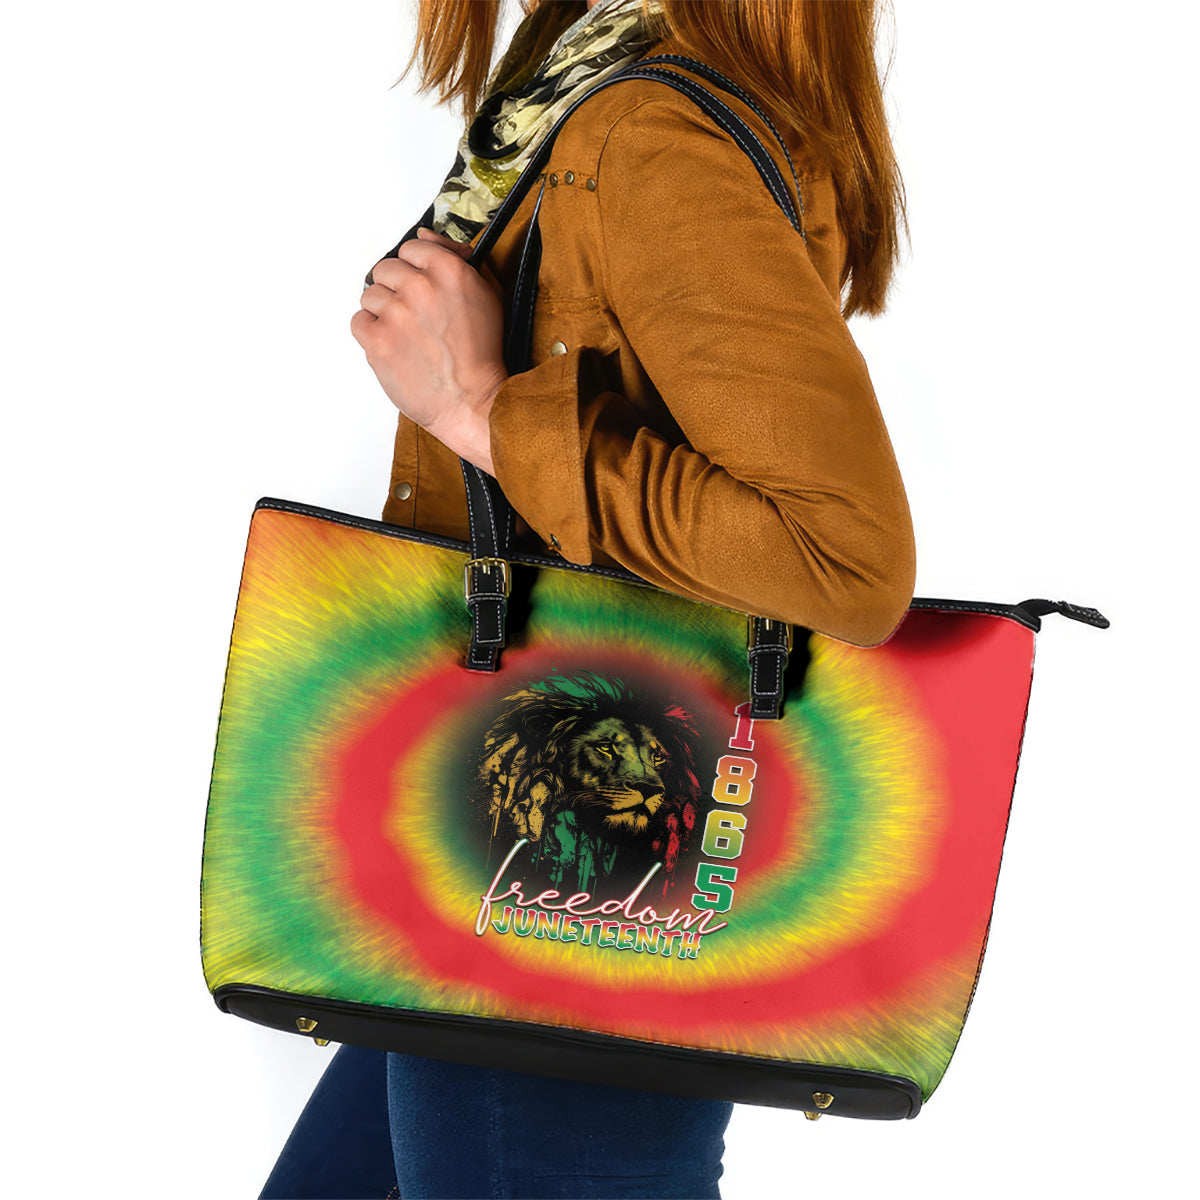 Juneteenth Freedom Day Leather Tote Bag Reggae Tie Dye Style